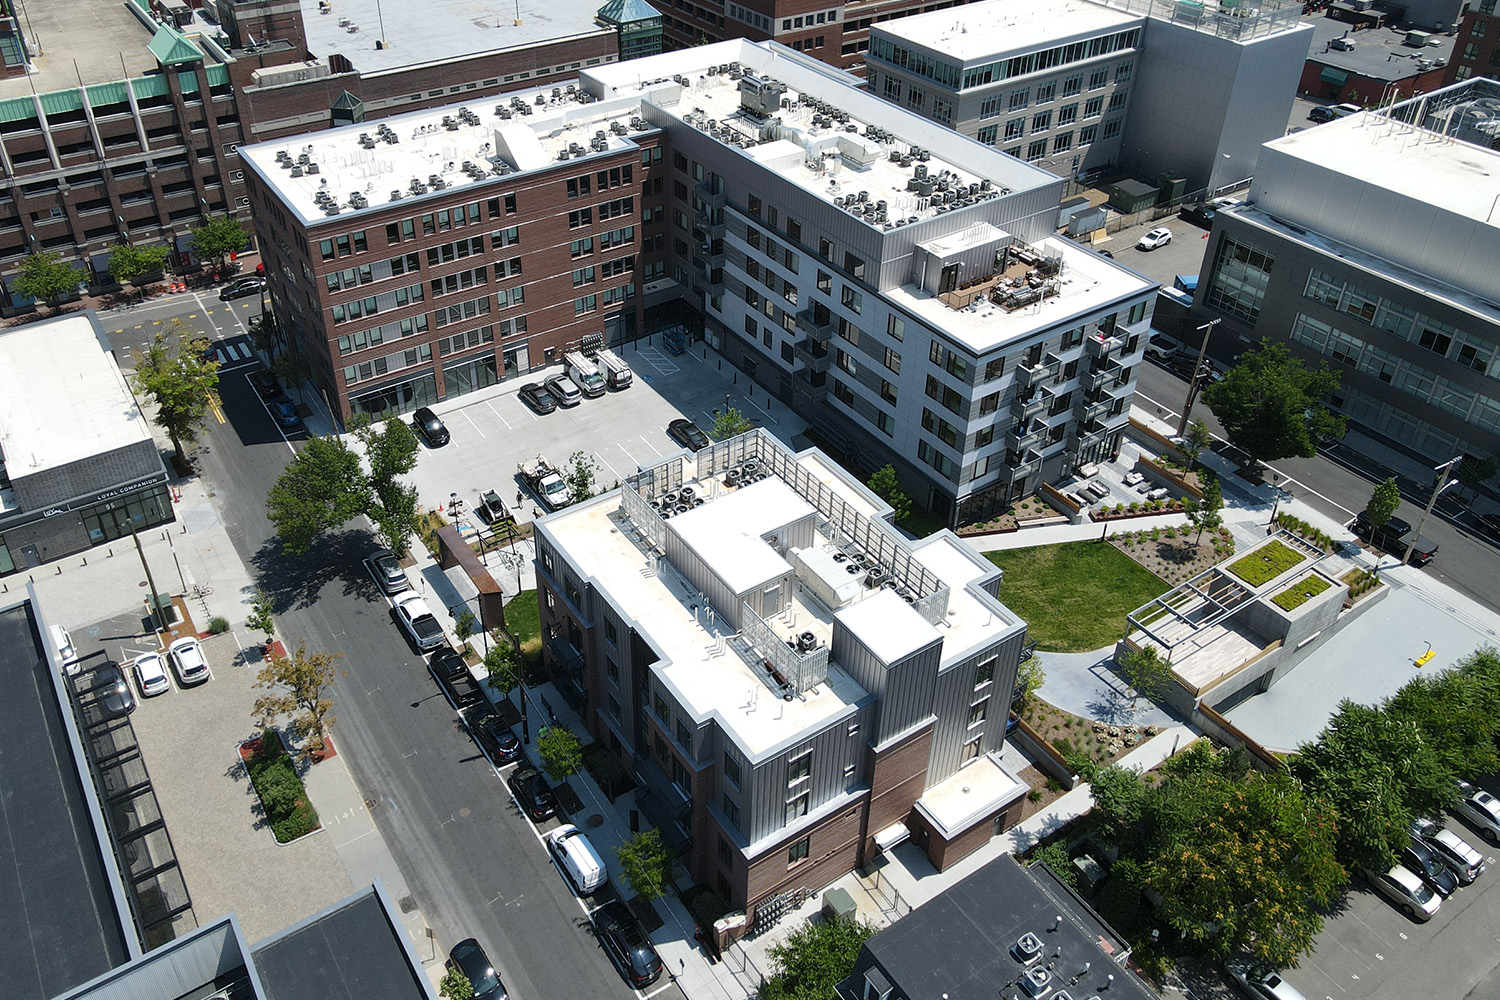 Aerial view of Flats on First development in the summertime